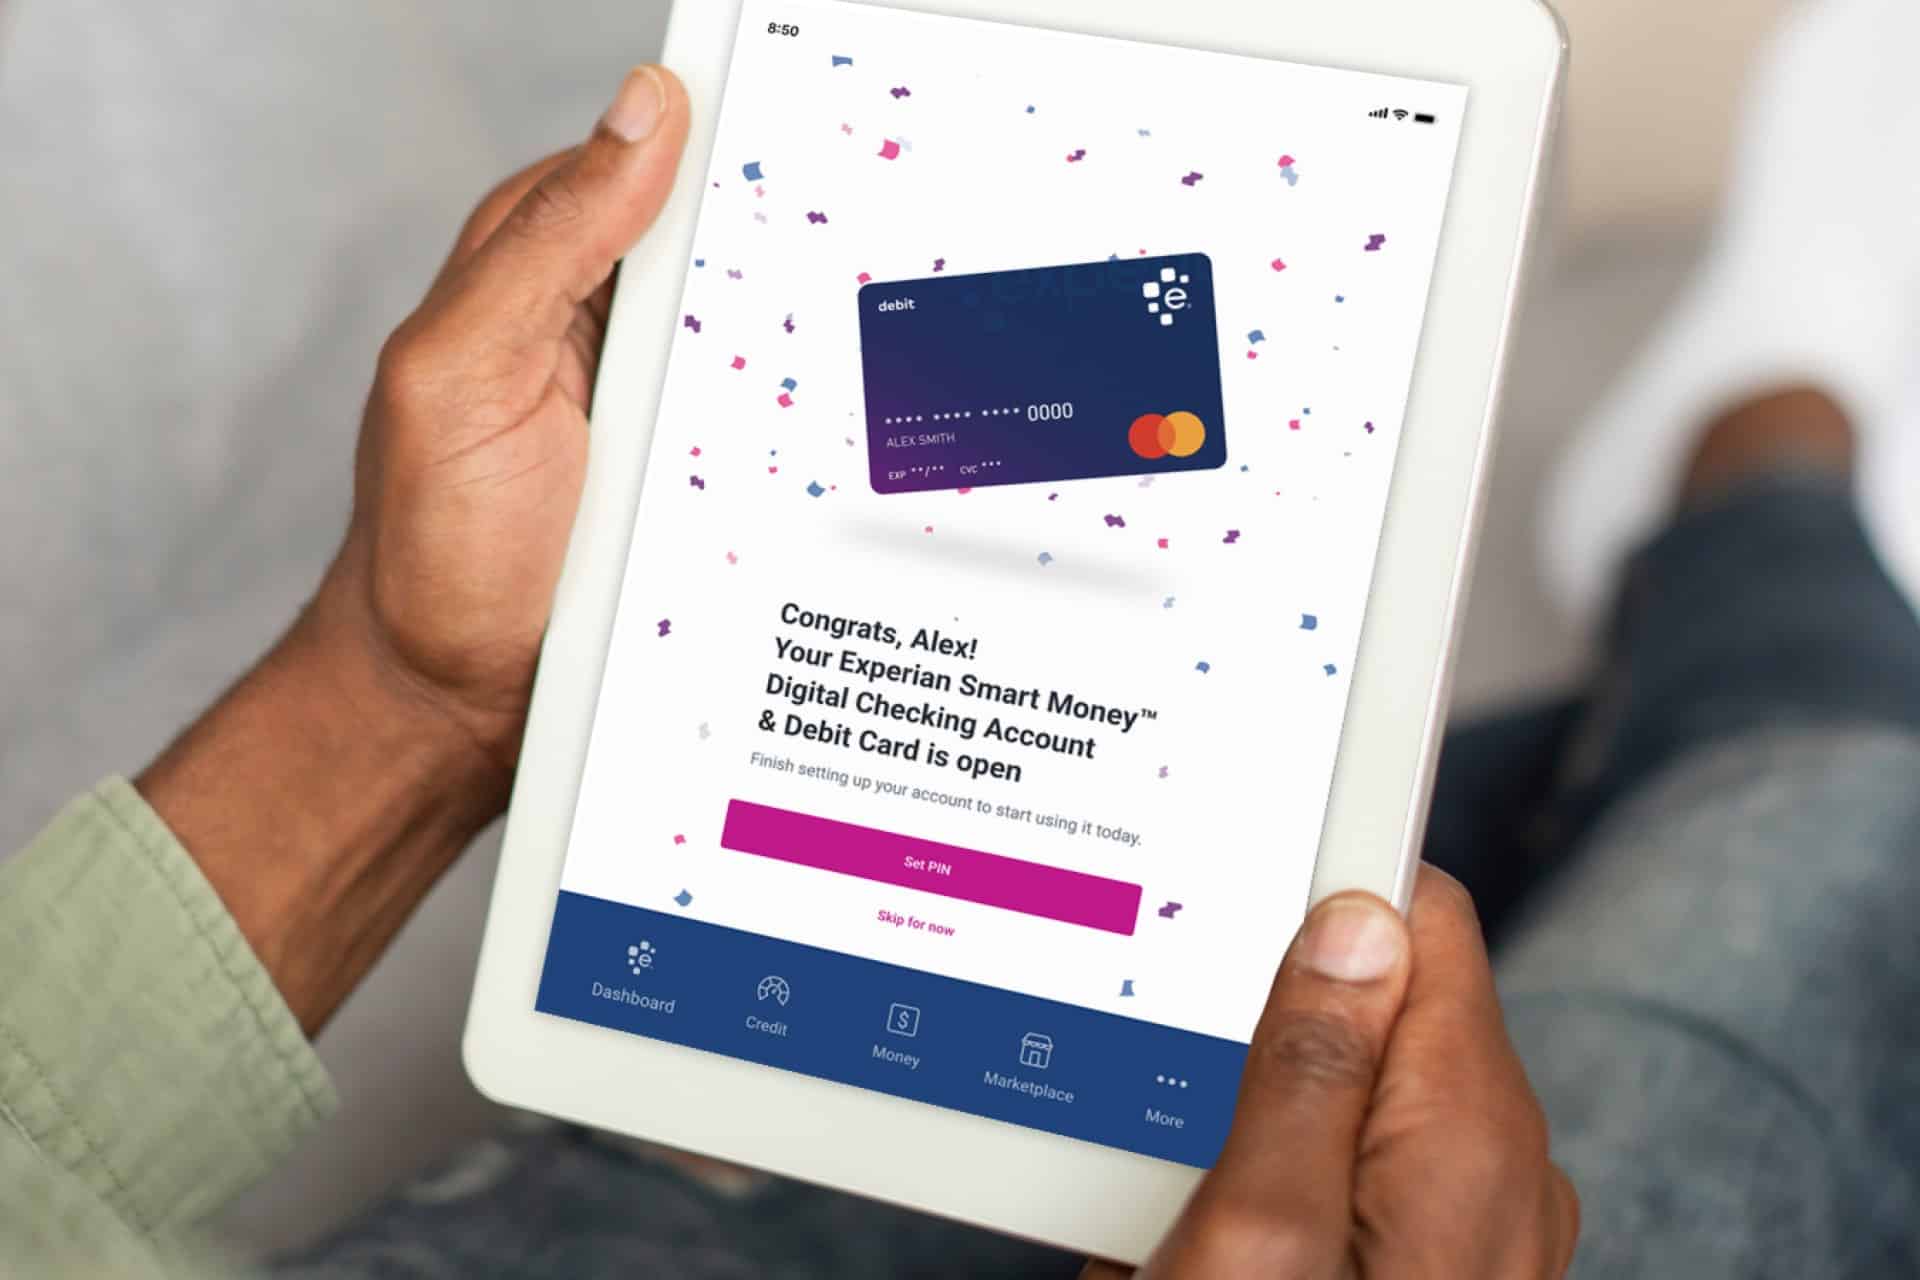 Build Credit Debt-Free with the New Experian Smart Money™ Digital Checking Account & Debit Card